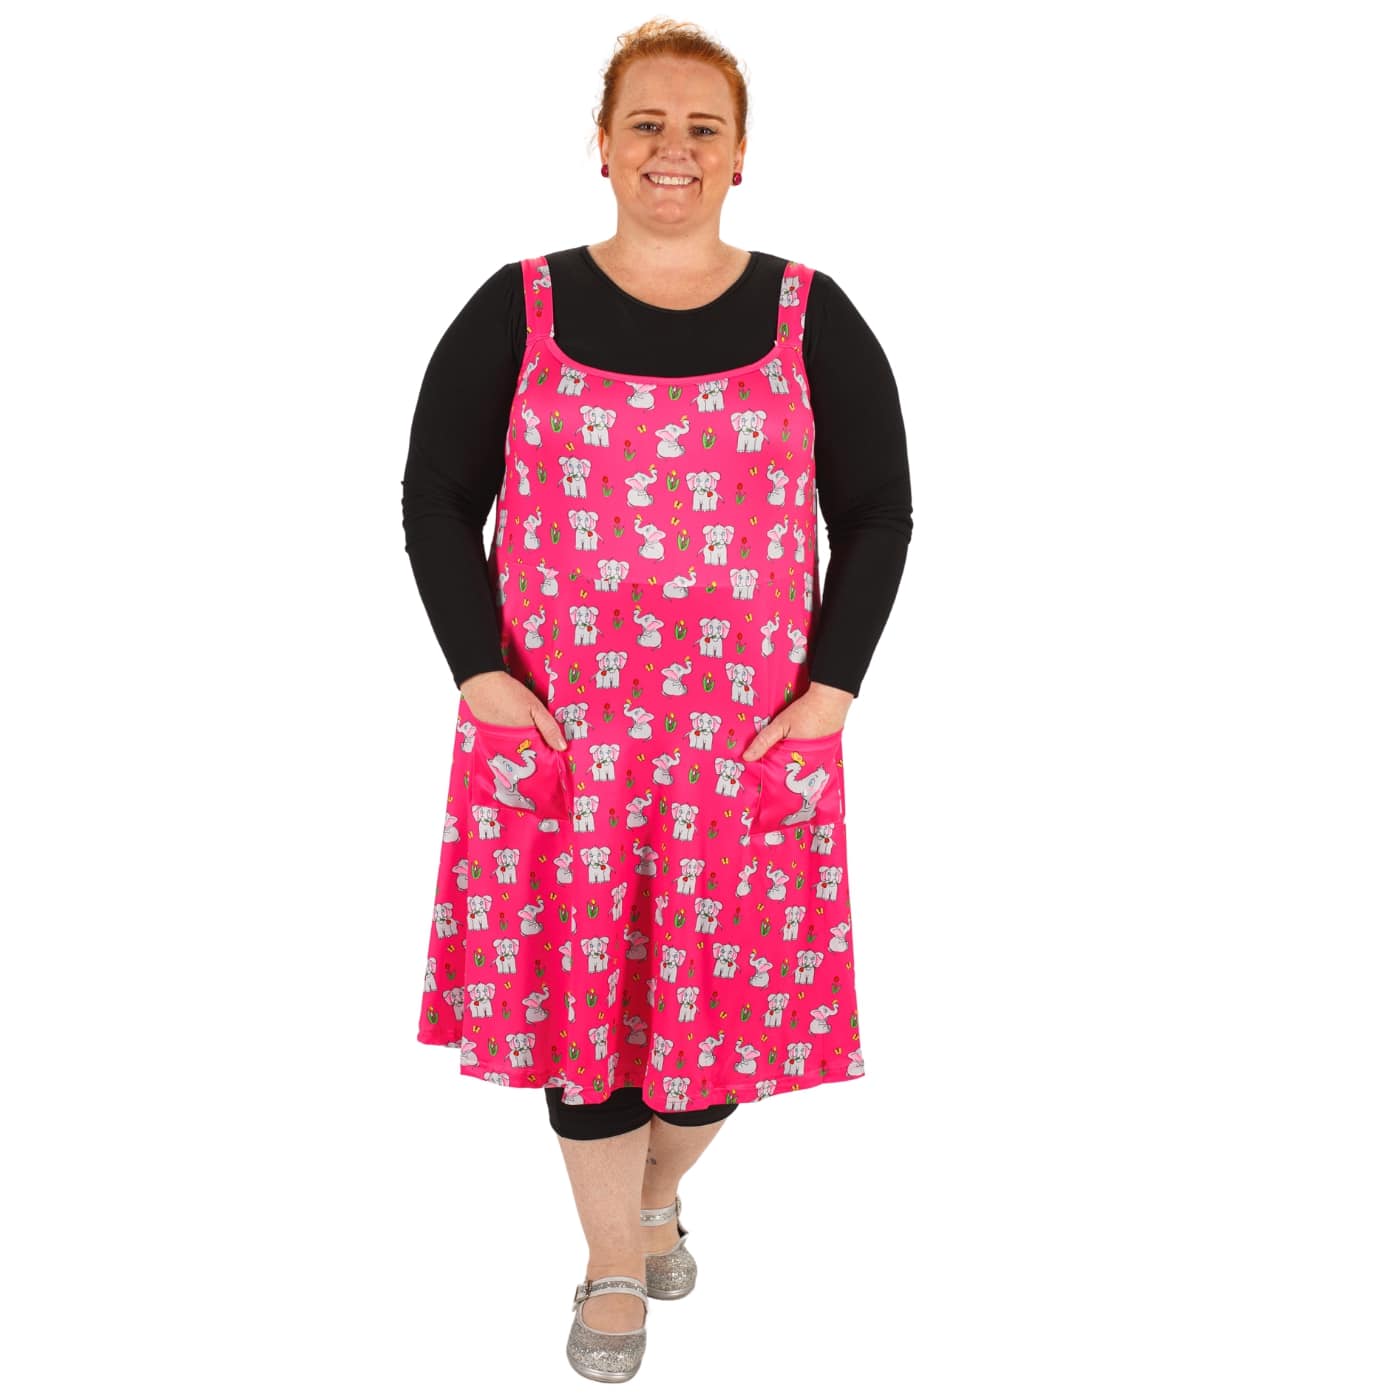 Parade Pinafore by RainbowsAndFairies.com.au (Elephant - Tulips - Pink - Dress With Pockets - Pinny - Kitsch - Vintage Inspired) - SKU: CL_PFORE_PARAD_ORG - Pic-04